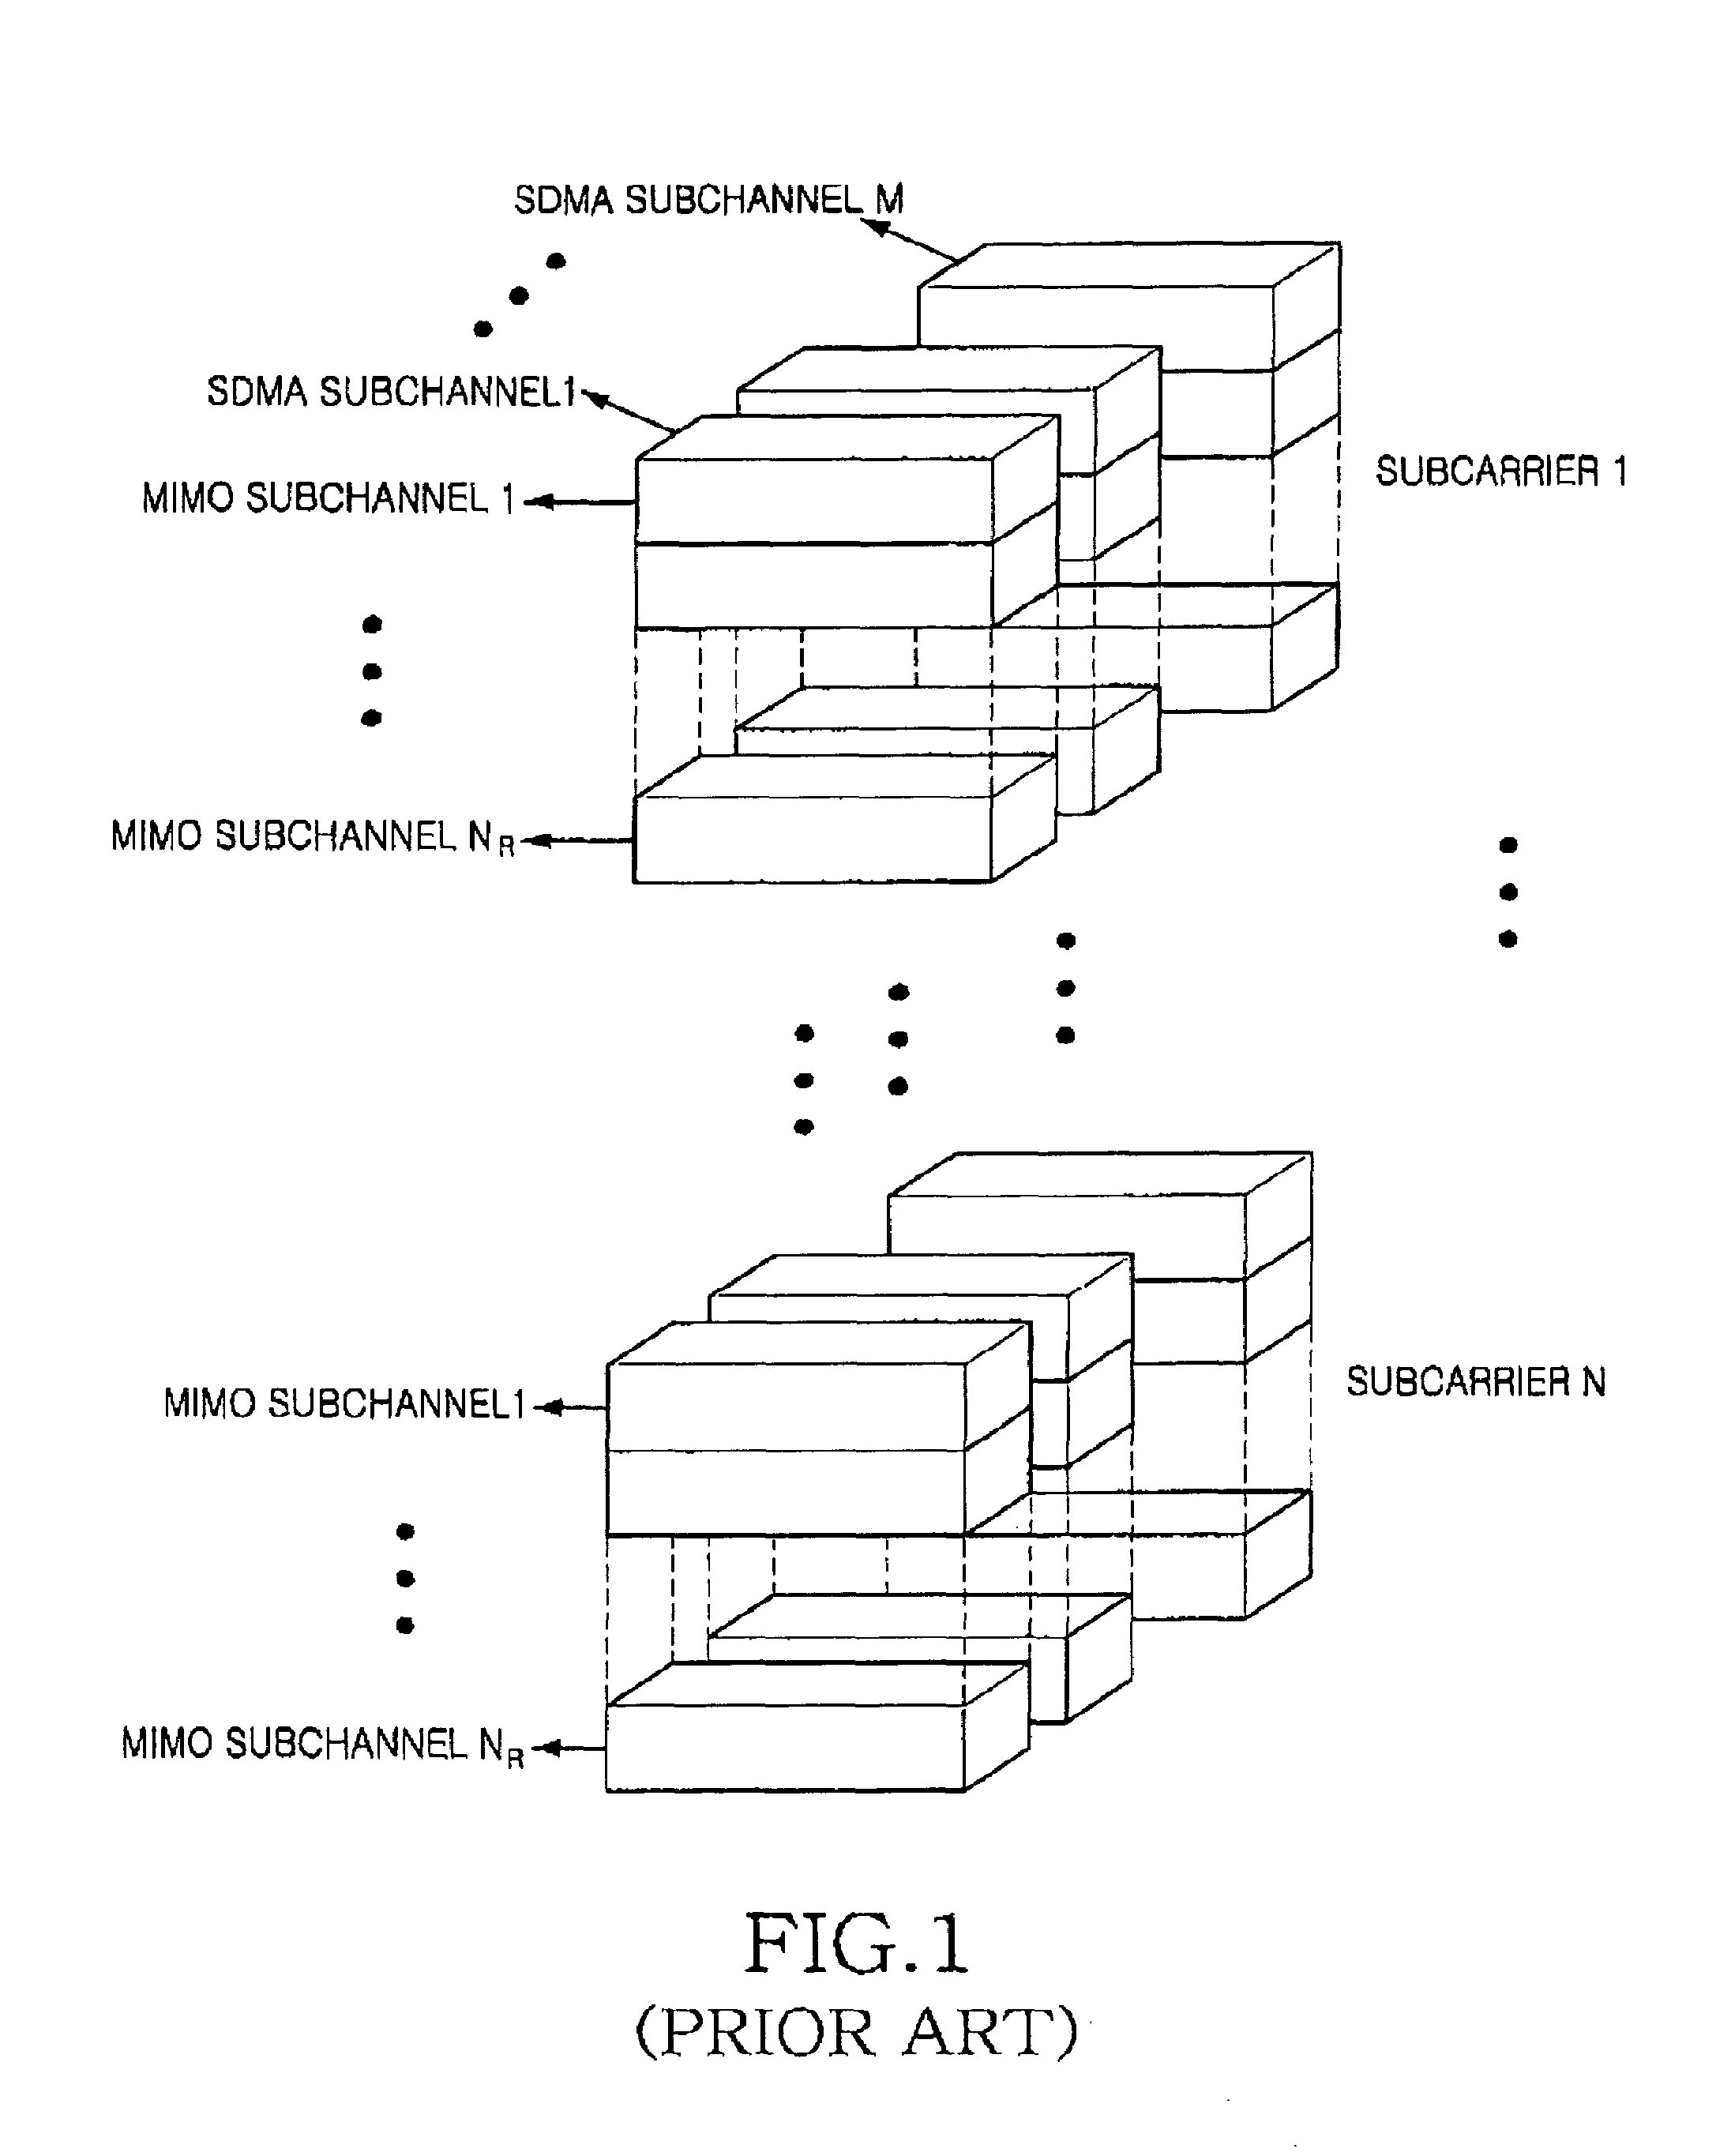 Dynamic subchannel and bit allocation in a multiuser-MIMO/OFDMA system